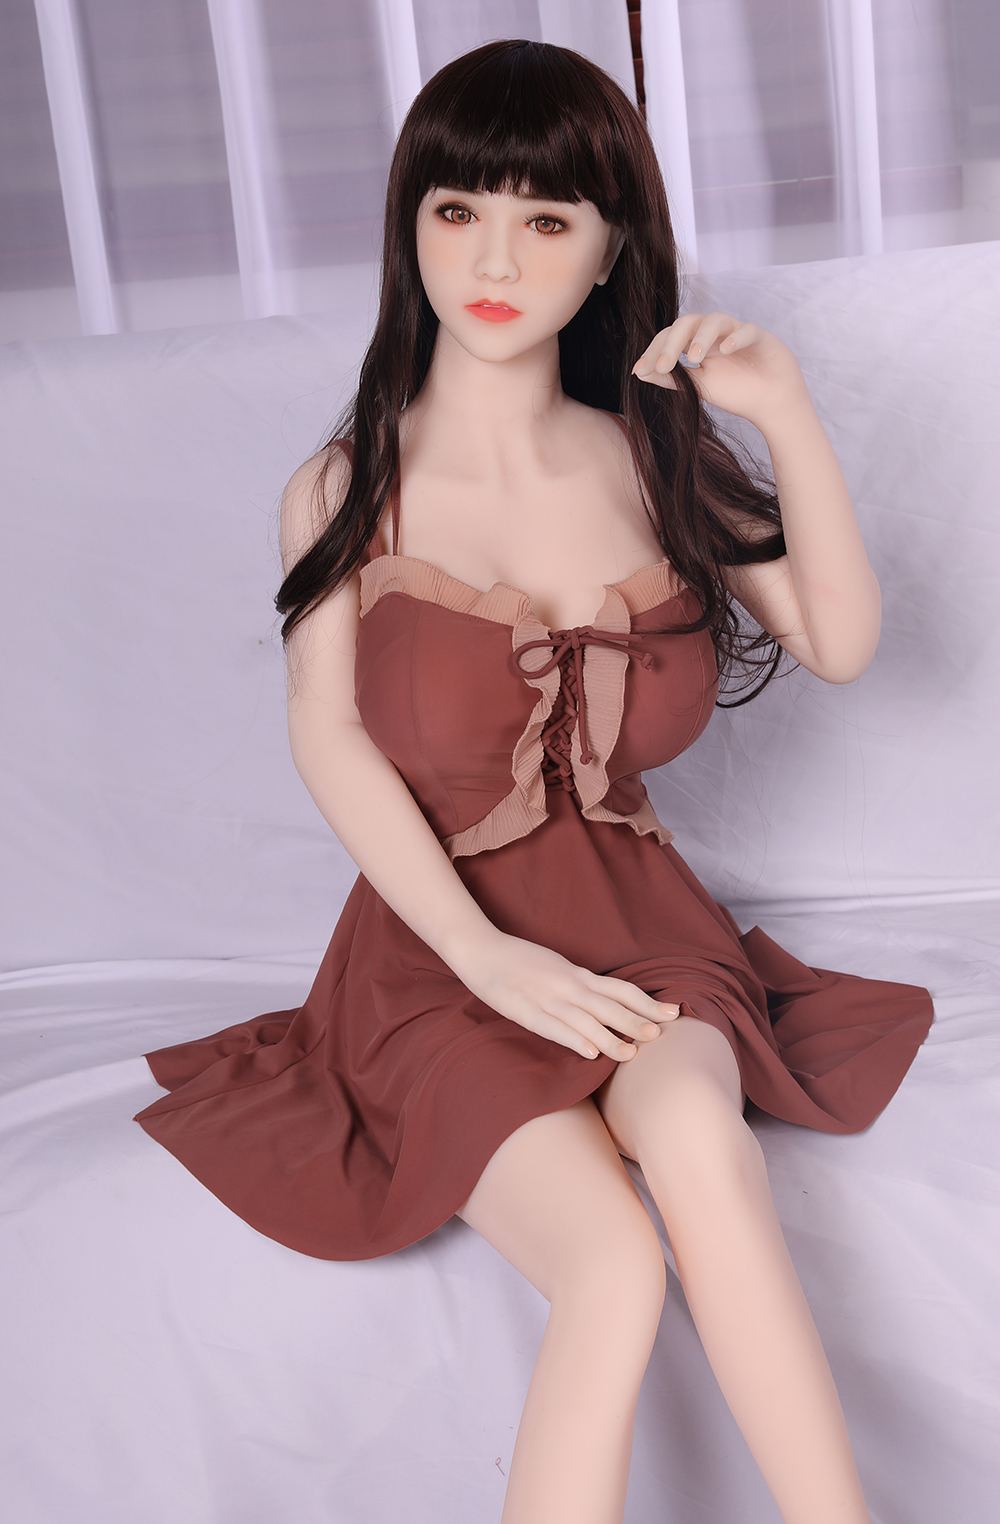 detachable sex doll for travelling